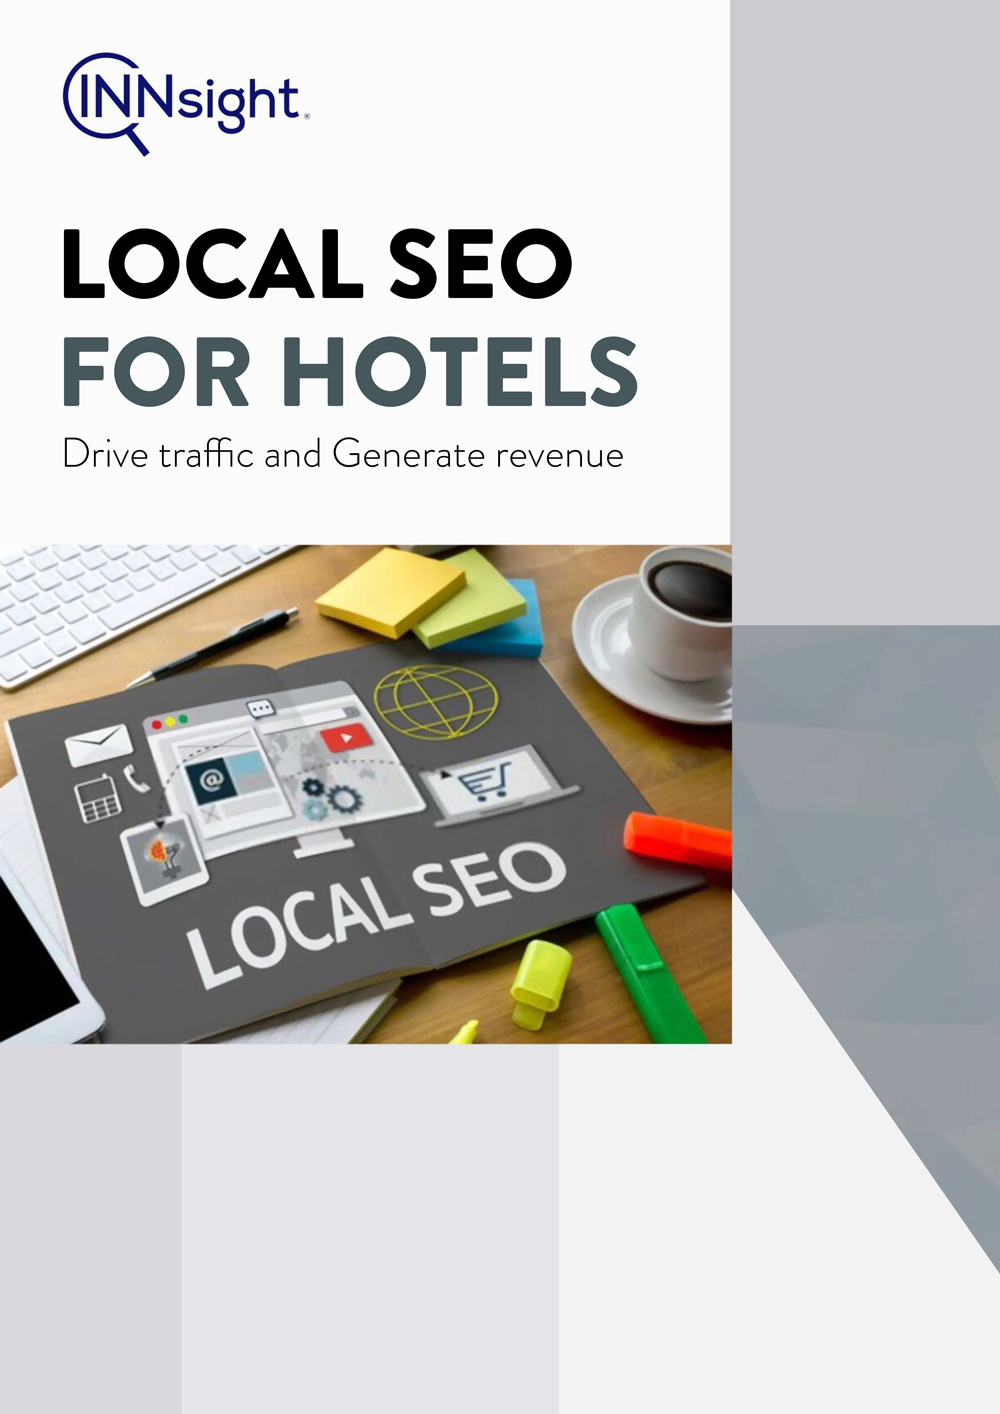 Local SEO For Hotels Drive Traffic and Generate Revenue